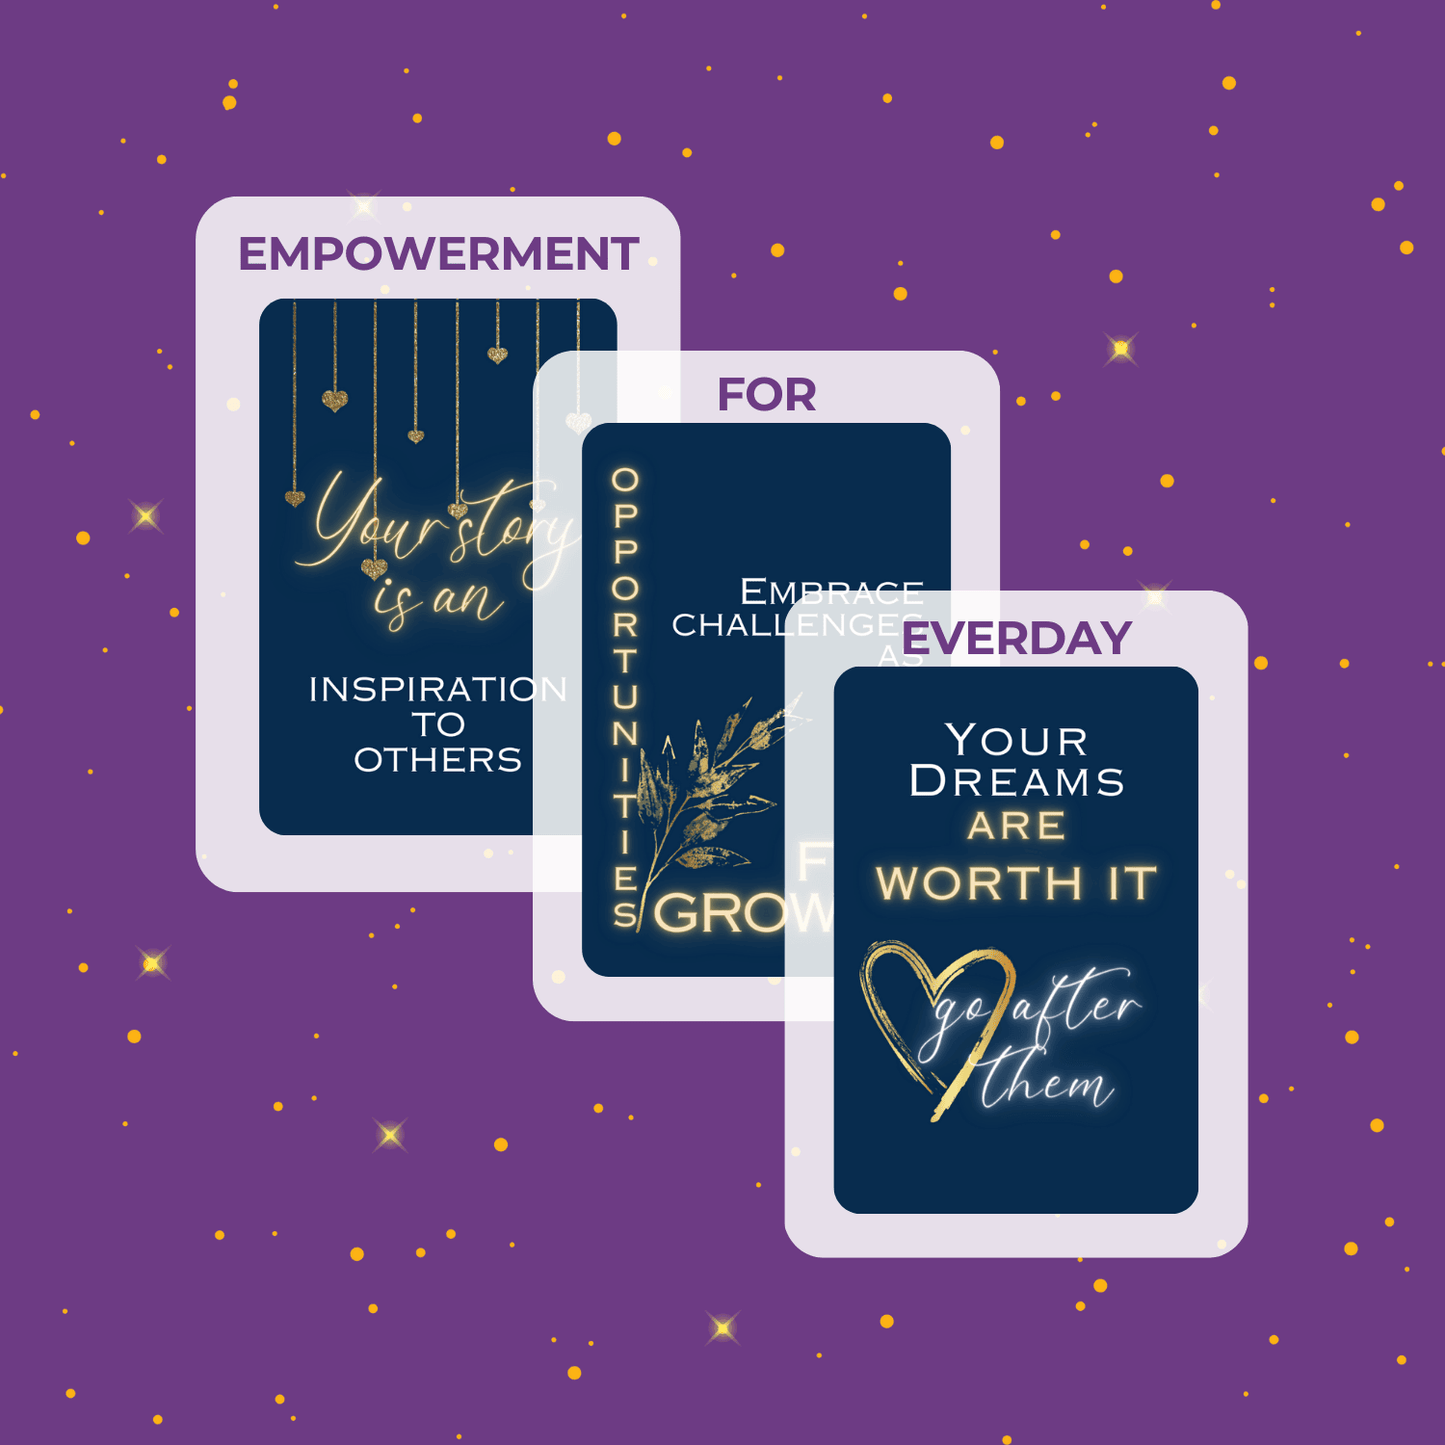 Title image  is a spead of three cards from the Be Empowered Printable Card Deck by Patty Rose_Your Story is an inspiratin to otheres, Embrace challenges as an opportunity for growth_your dreams are worth it go after them_Polka Dot Patty Shop 